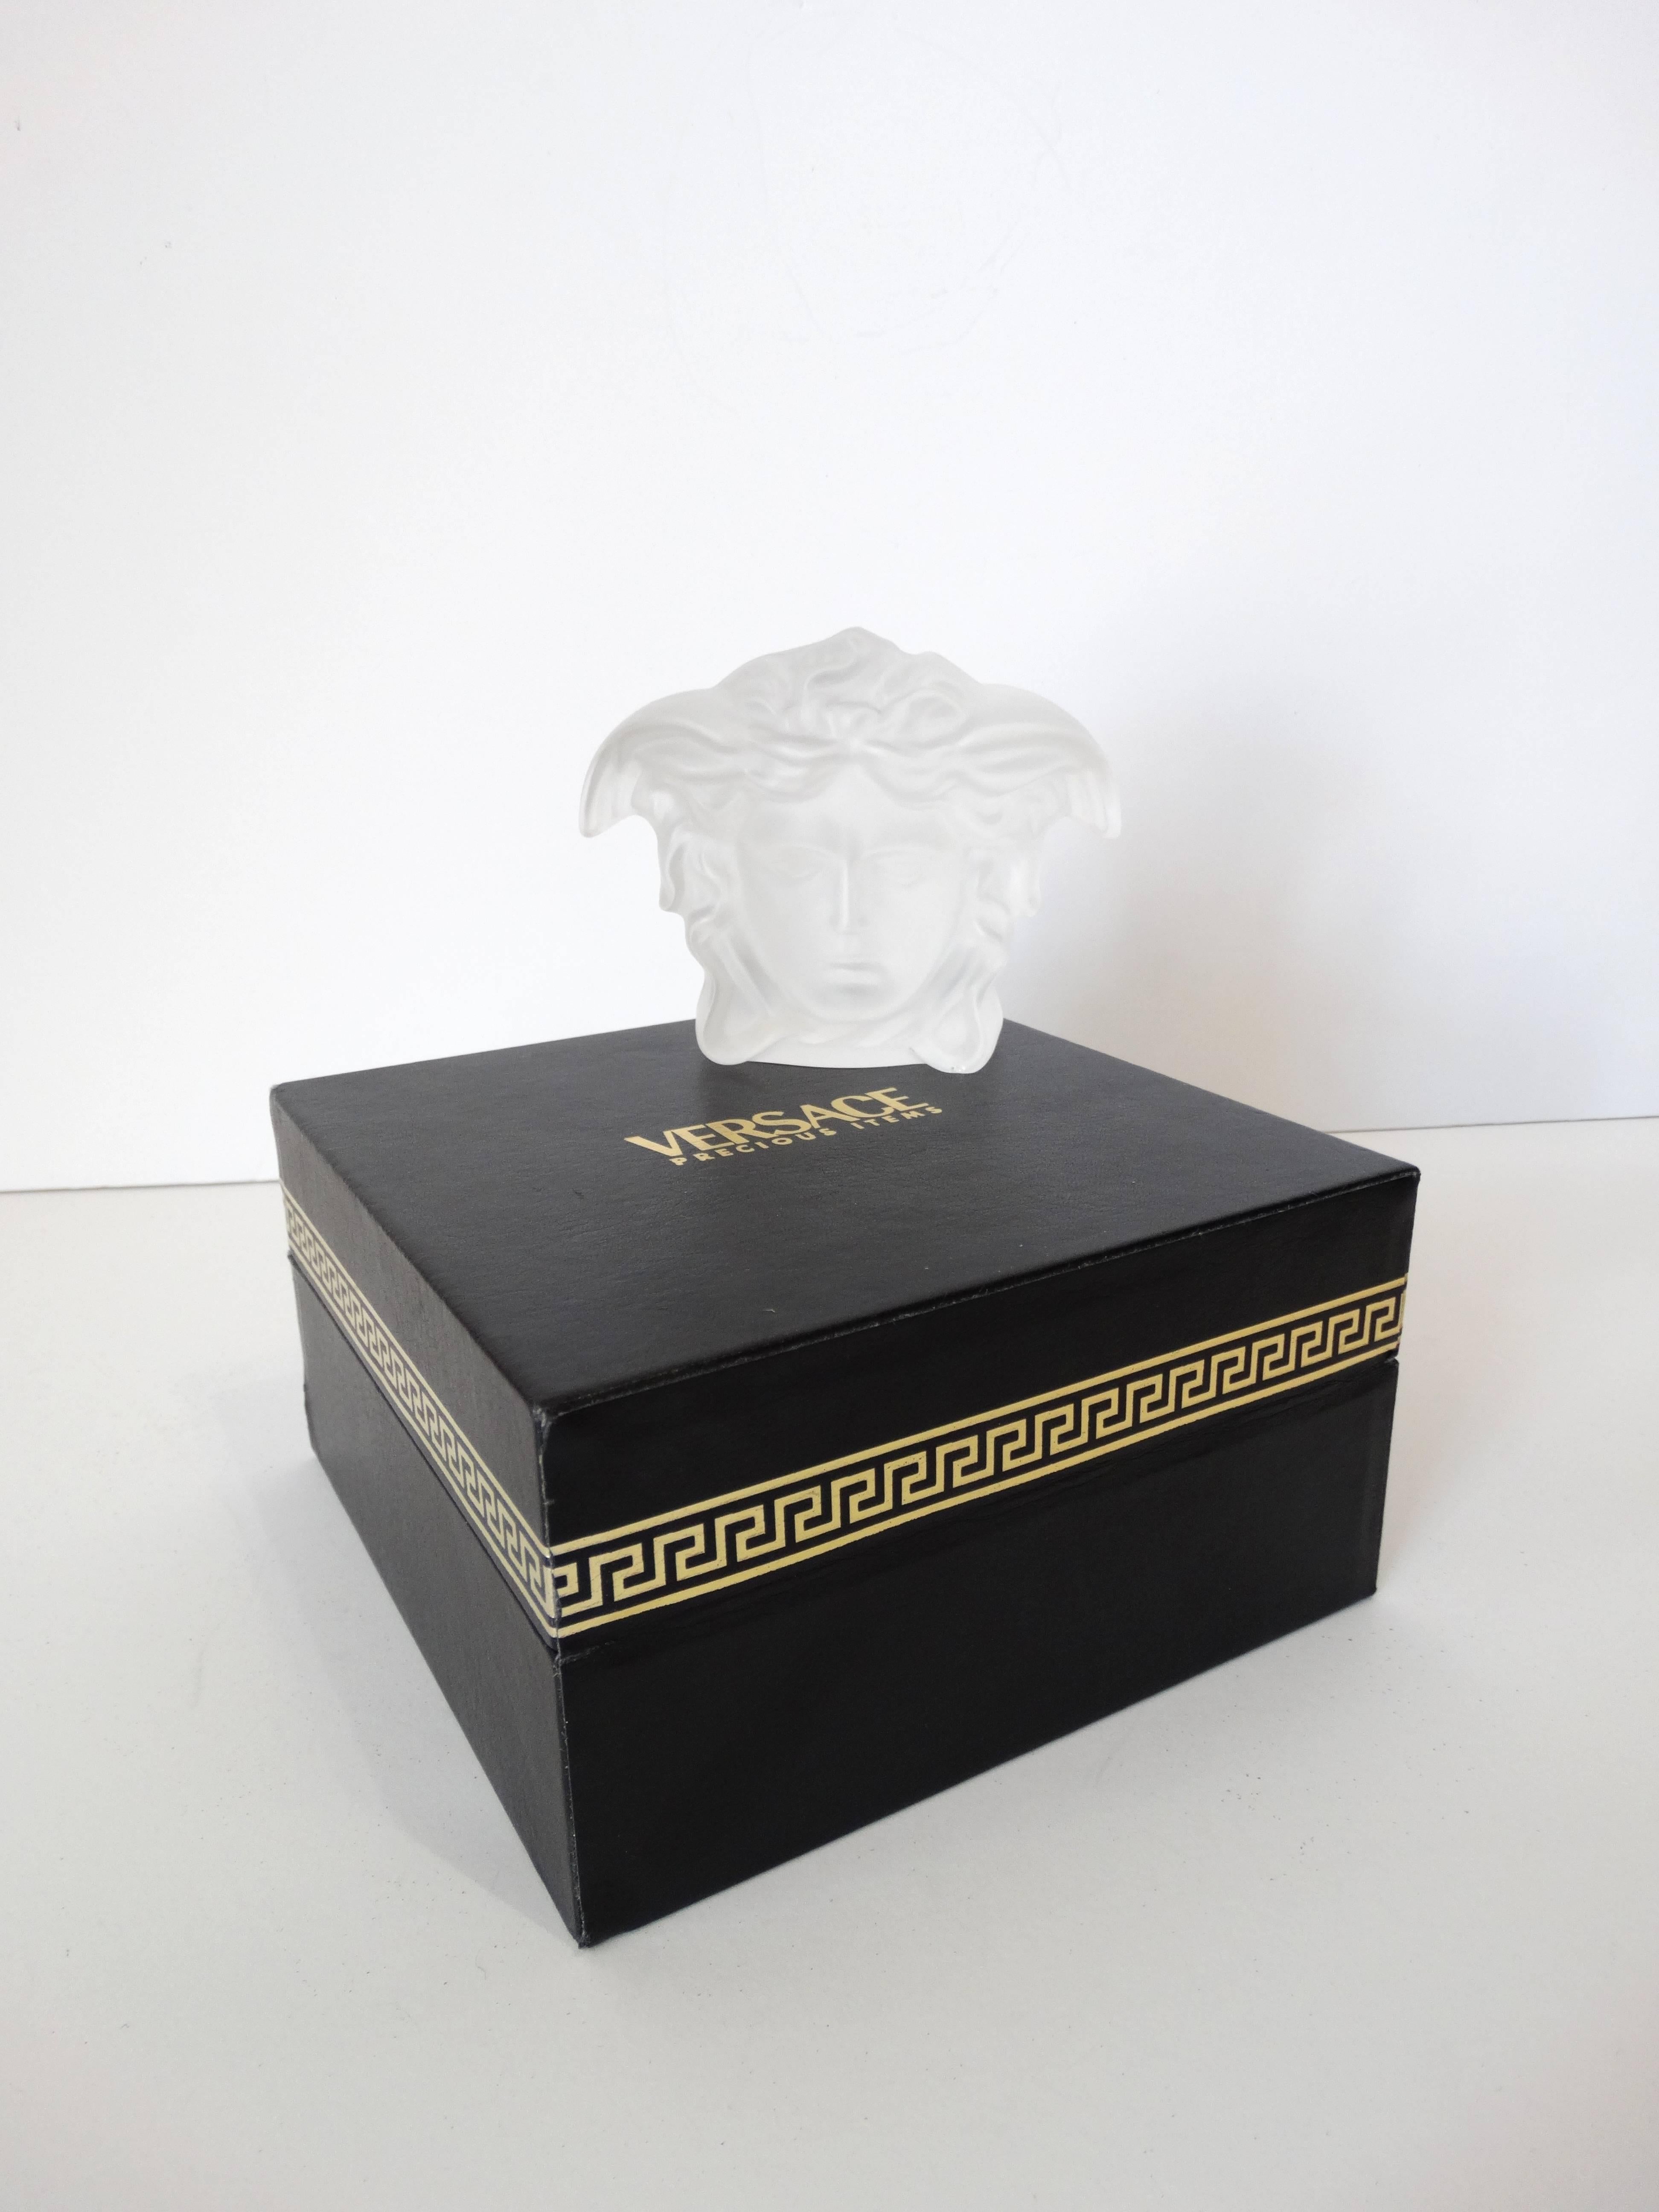 Add some vintage to your desk decor with our Versace paperweight! Classic Versace Medusa head silhouette made of a heavy semi translucent frosted glass! Made in collaboration with Rosenthal! Signed at the bottom with Rosenthal x Versace. Comes with